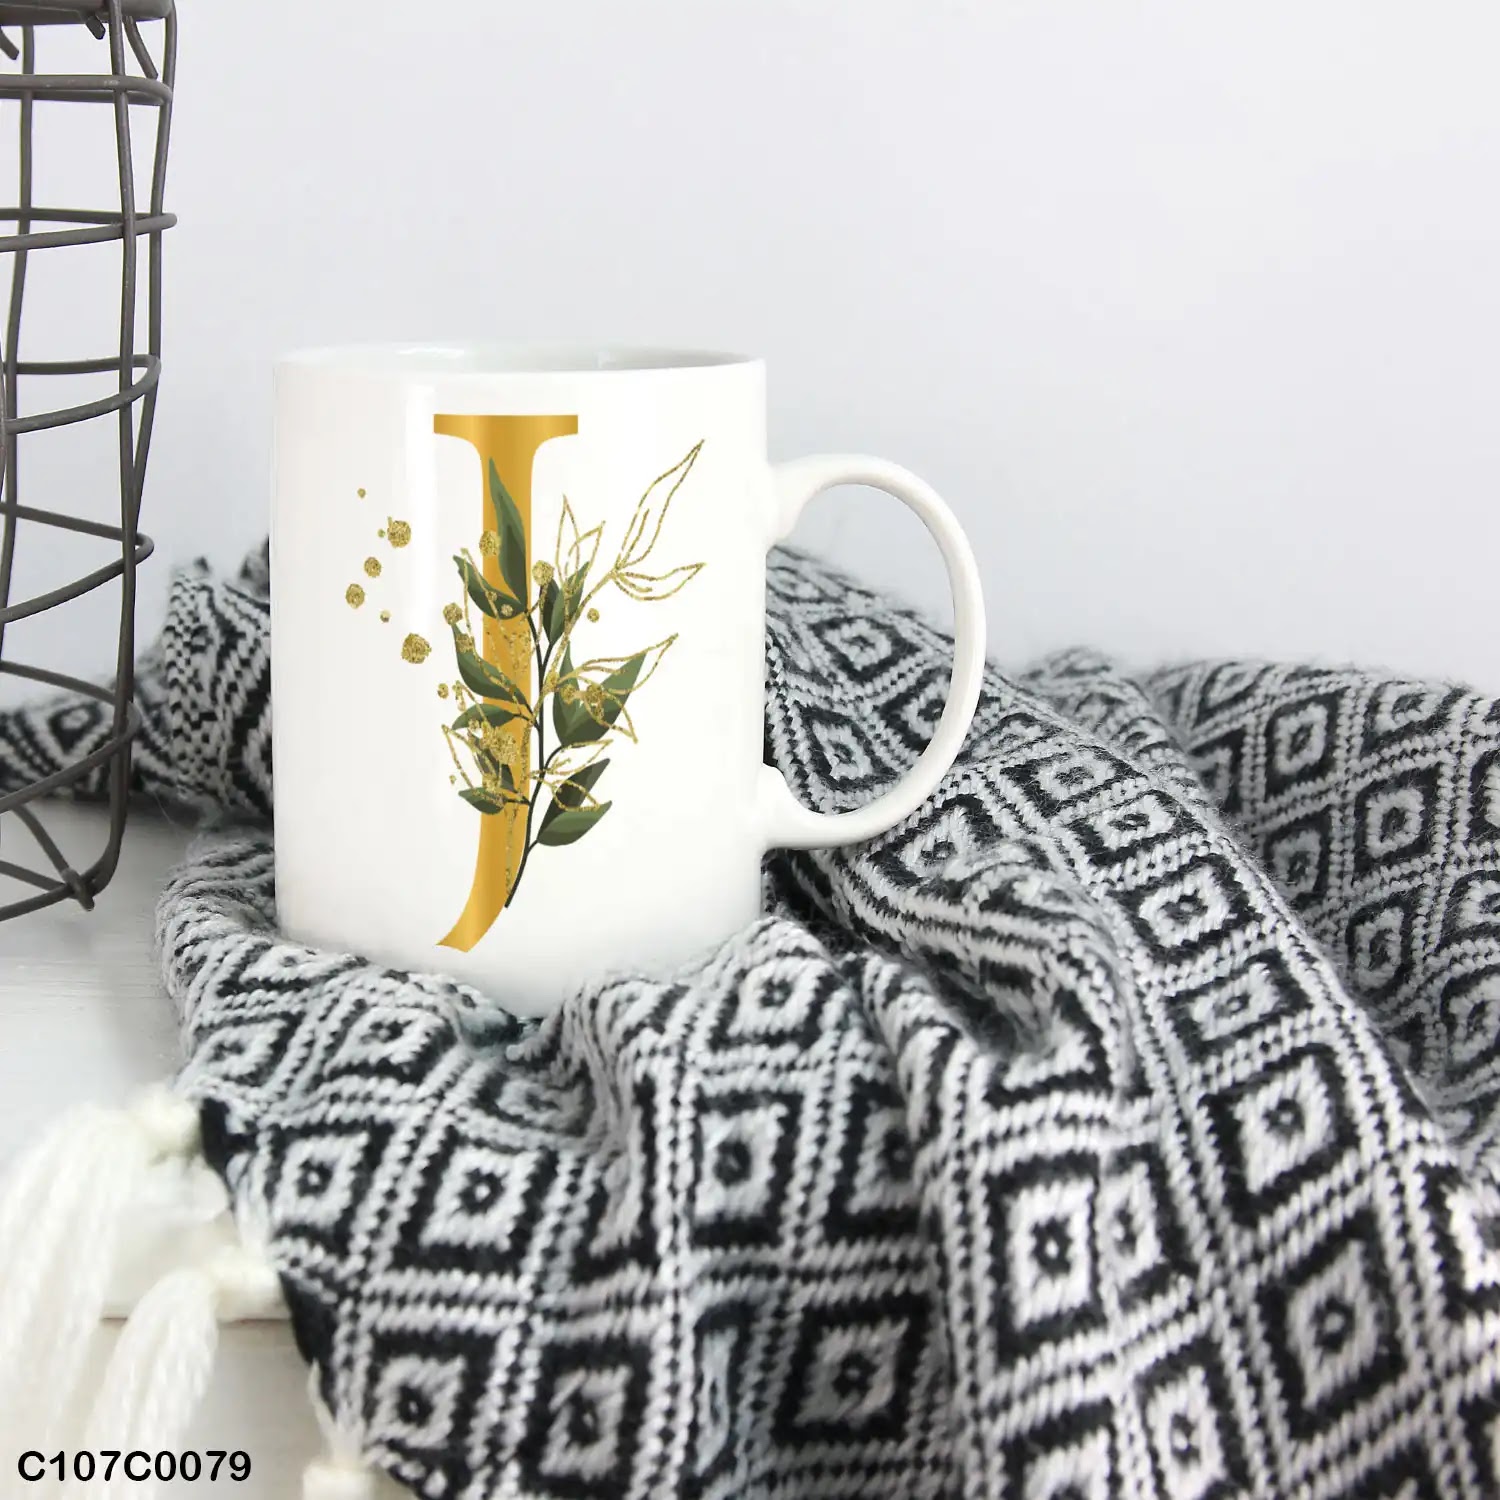 A white mug (cup) printed with gold Letter "J" and small green branch